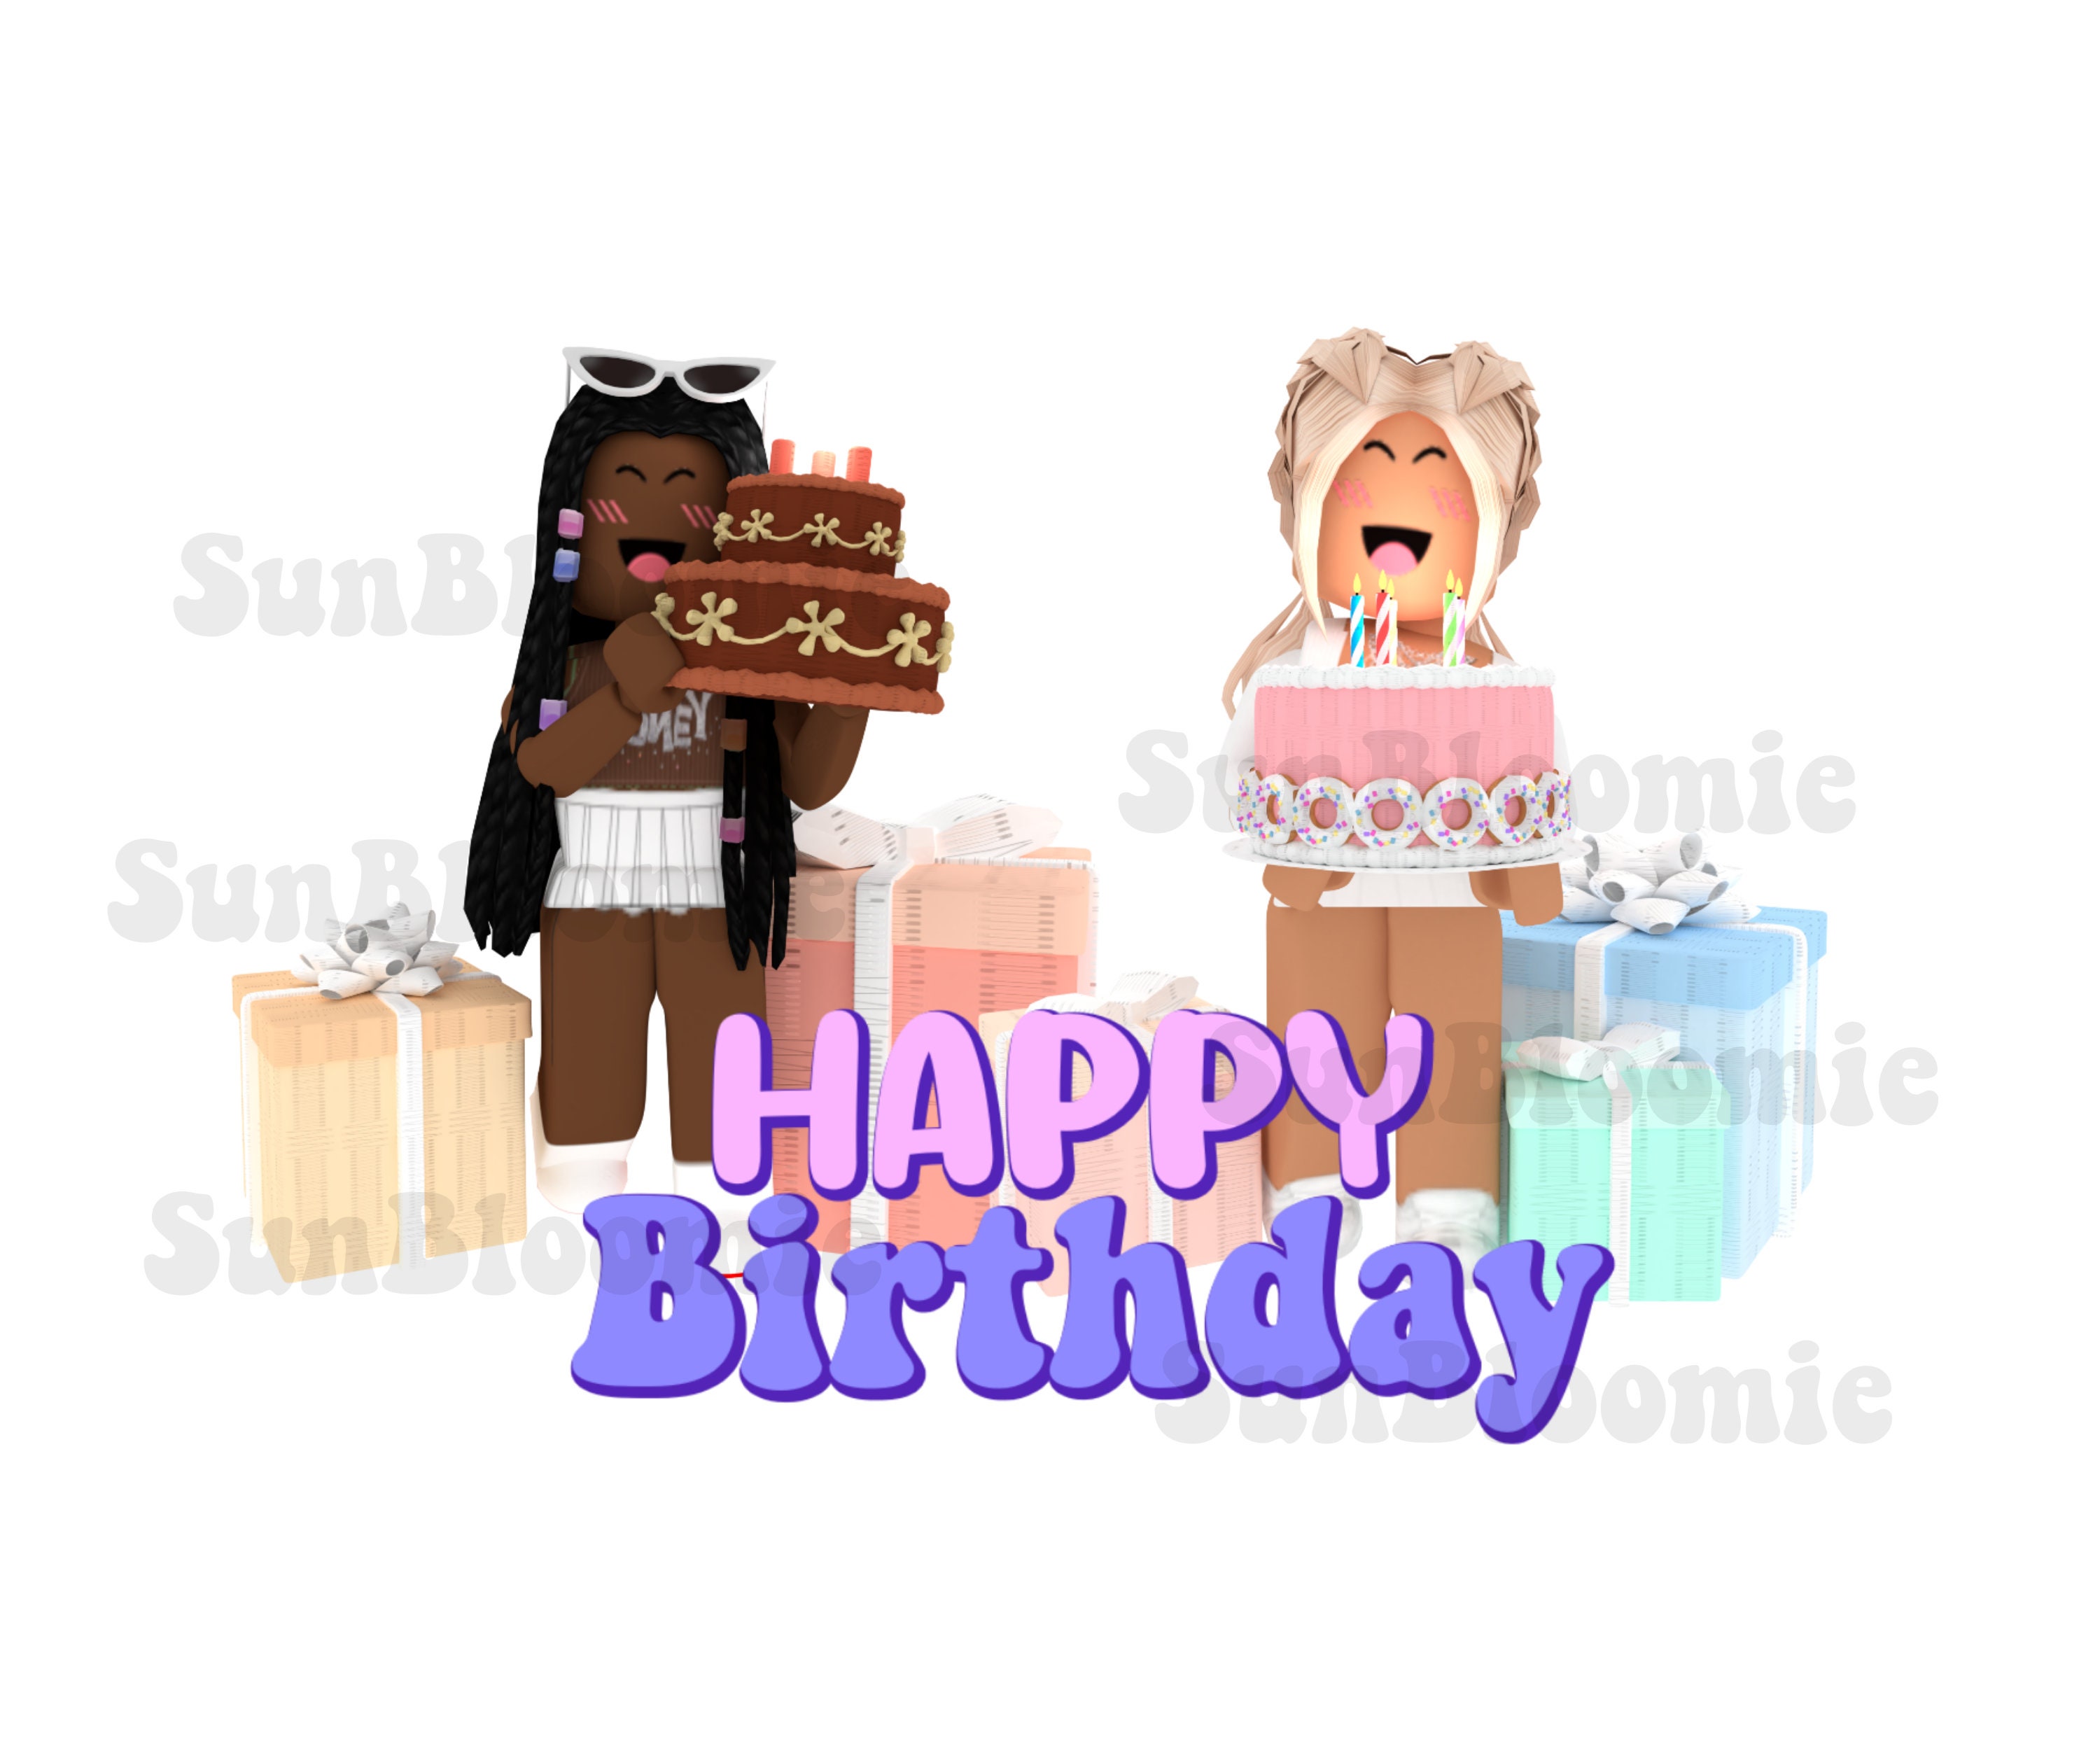 Girls Roblox Birthdayparty Girl Roblox Zoom Party Background -  Israel